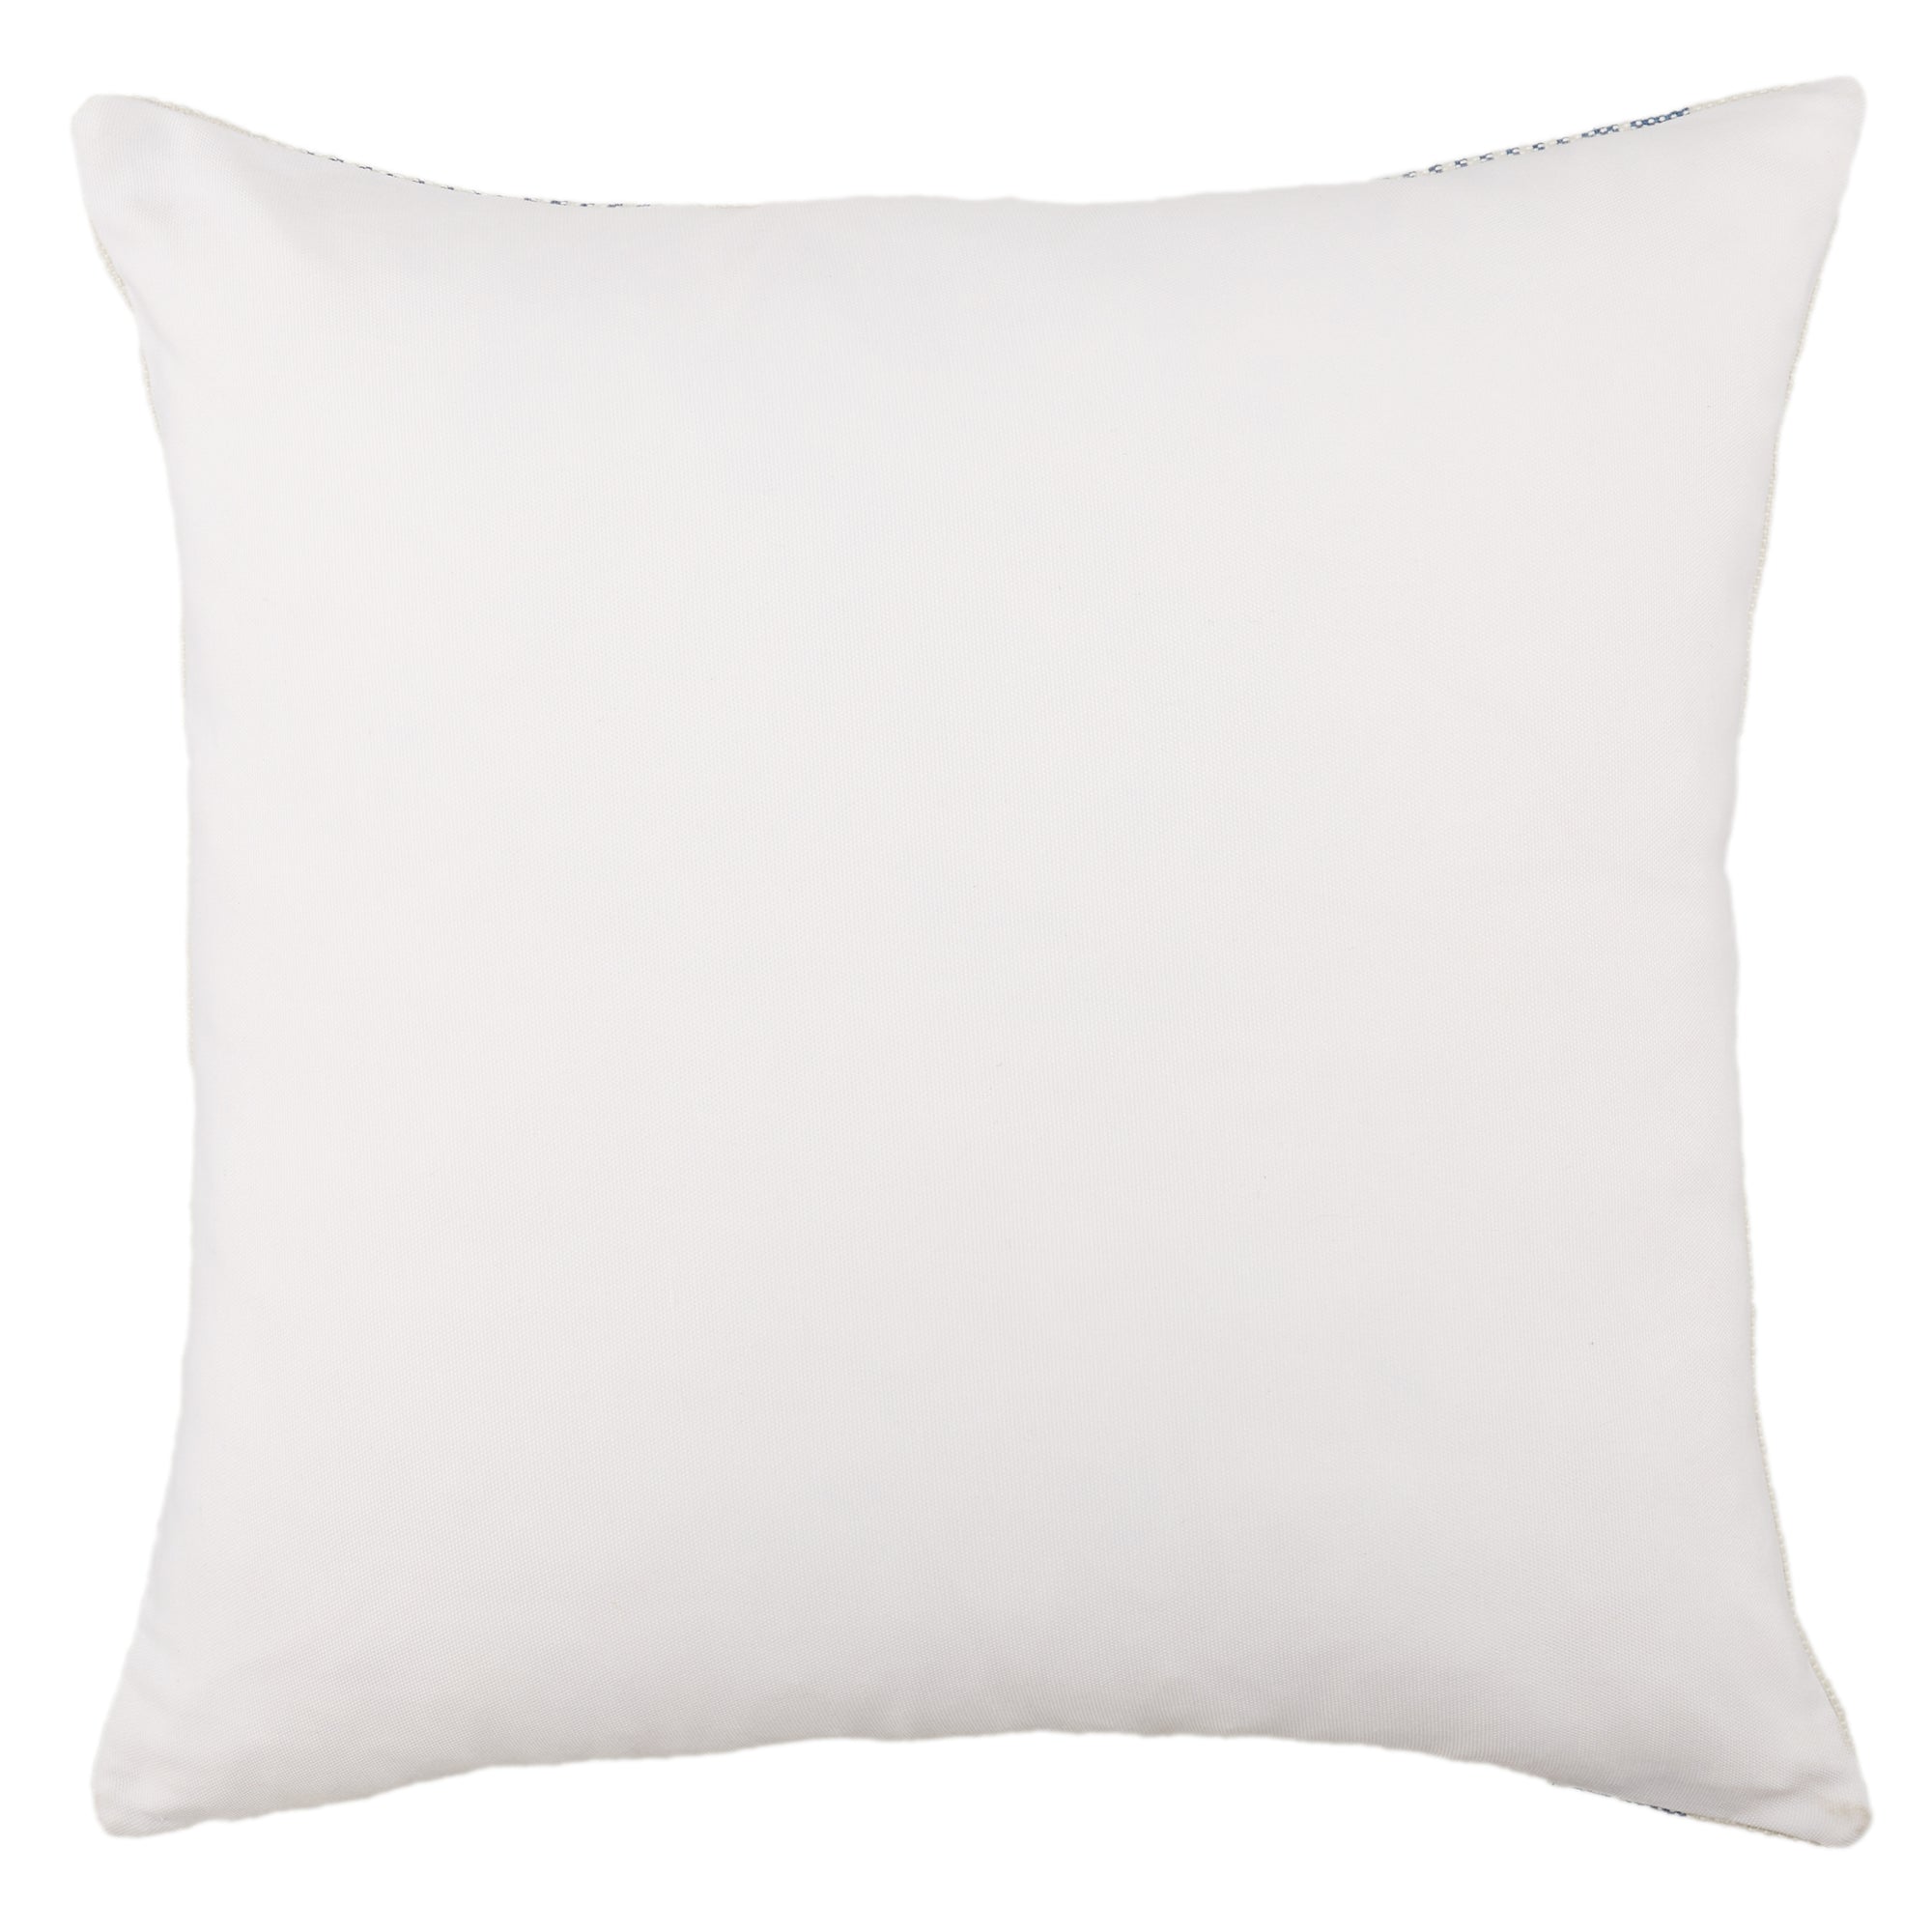 Jaipur Living Parque Outdoor Gray Ivory Striped Poly Fill Pillow